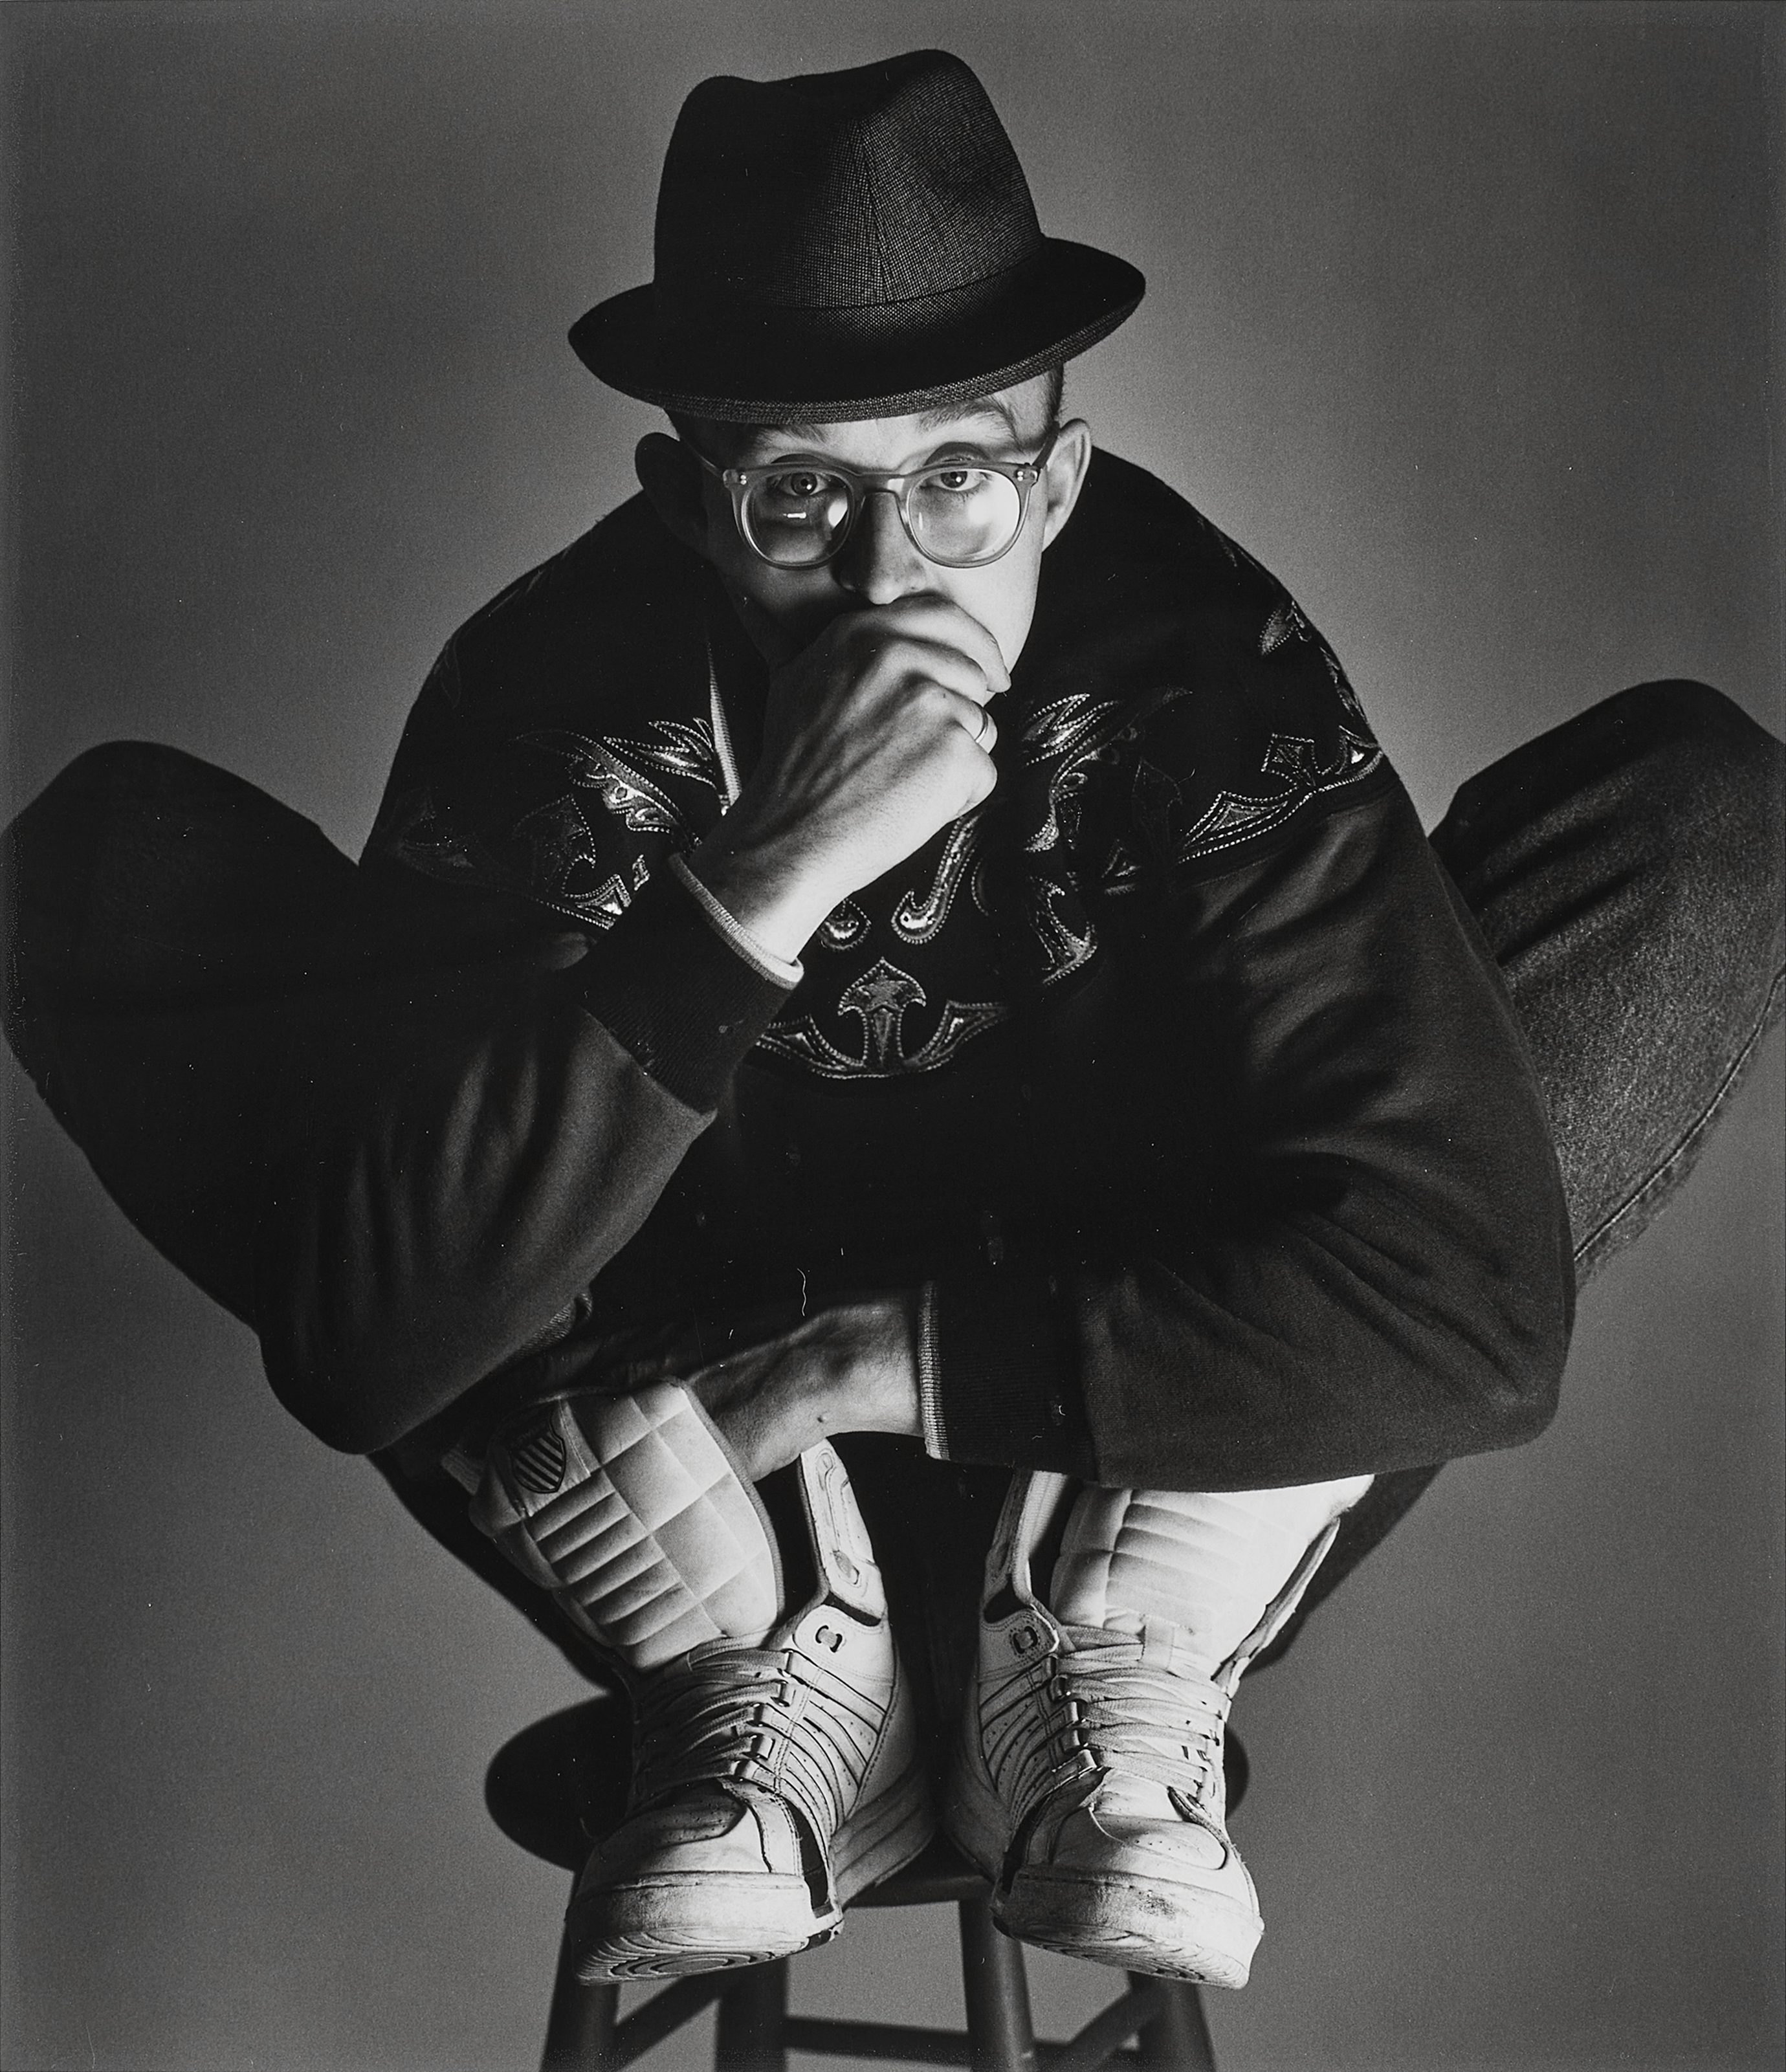 Keith Haring, New York by Herb Ritts, dated 1989